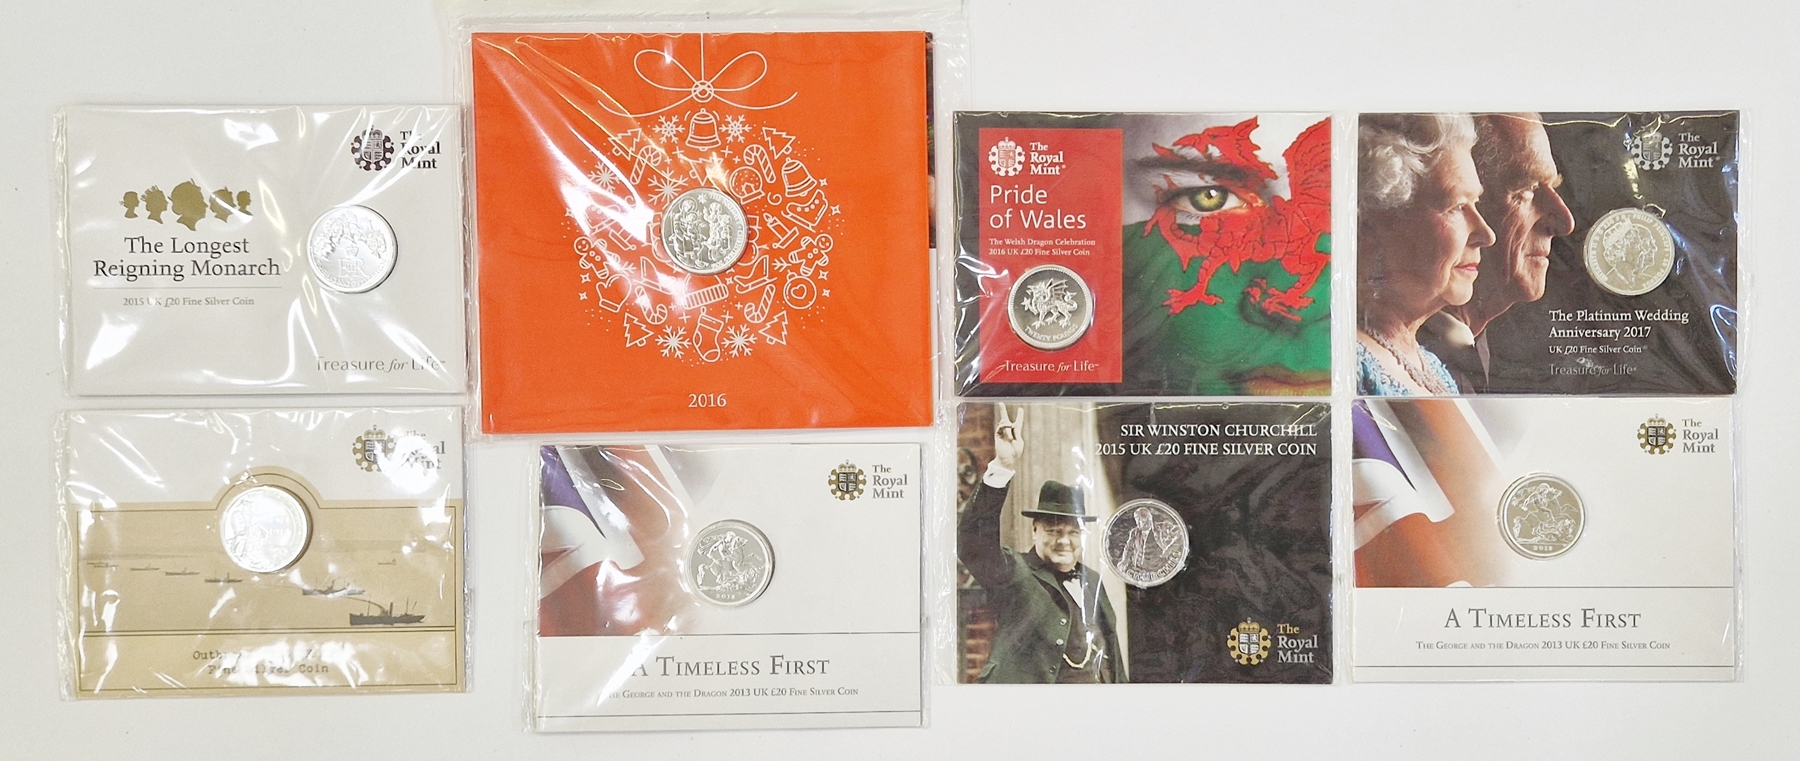 From the Royal Mint, brilliant uncirculated silver £20 (8), 2013 x 2 George and the Dragon, 2014